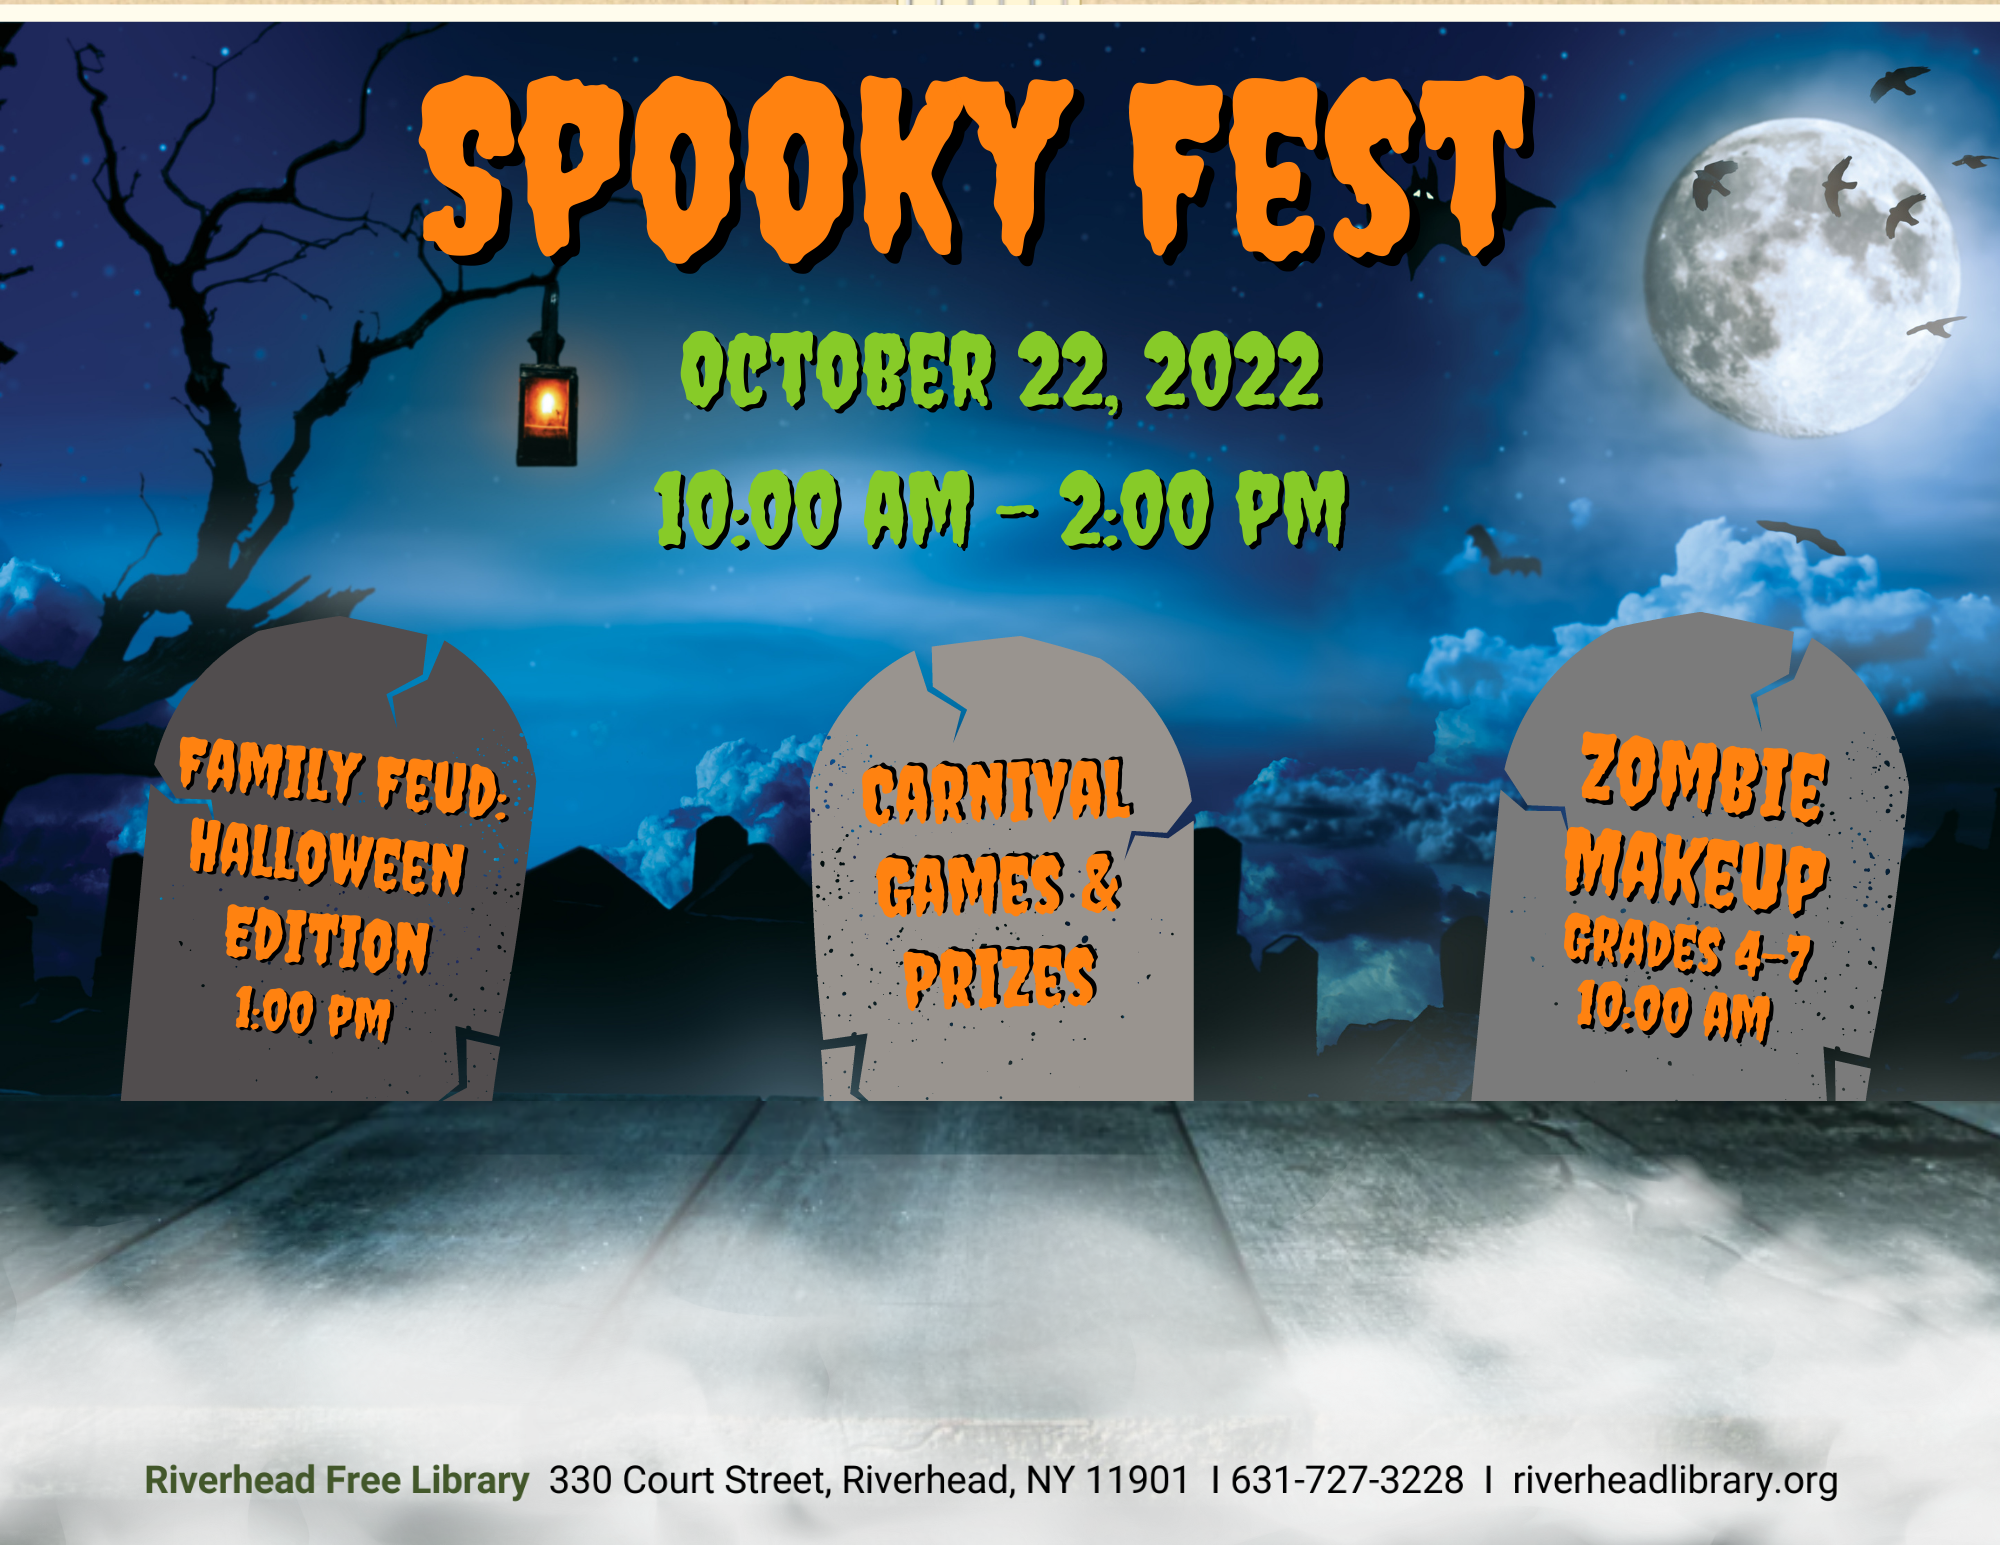 Program flyer featuring a spooky graveyard, followed by the following text, "Spooky Fest. October 22nd, 2022. 10:00am-2:00pm. Includes carnival games and prizes, a Zombie Makeup program (grades 4-7, 10:00am), and a Family Feud: Halloween Edition program (1:00pm)."